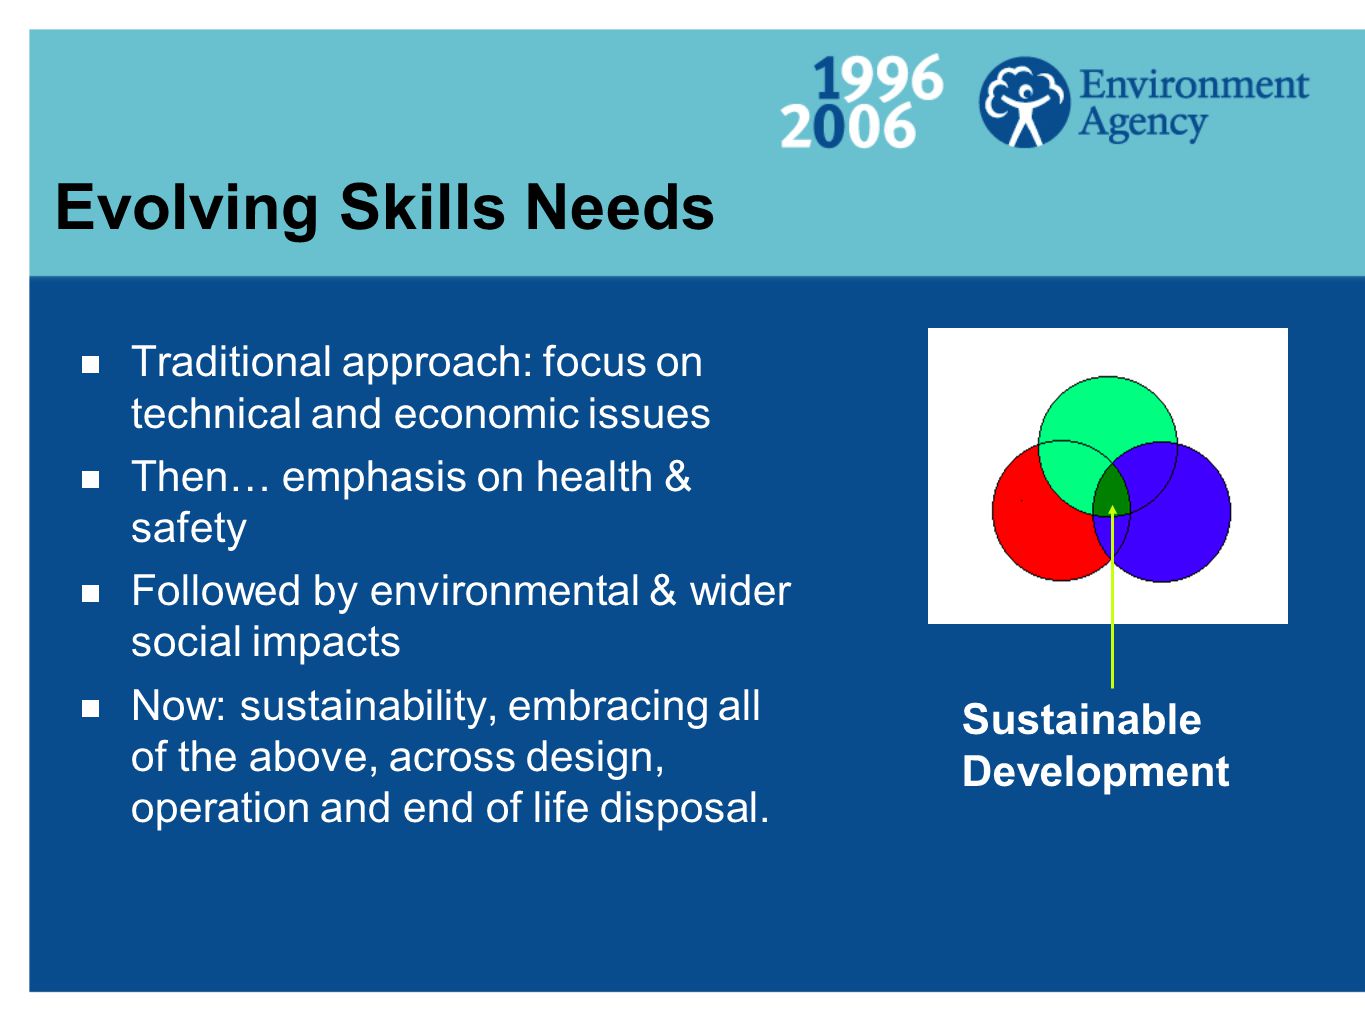 Evolving Skills Needs  Traditional approach: focus on technical and economic issues  Then… emphasis on health & safety  Followed by environmental & wider social impacts  Now: sustainability, embracing all of the above, across design, operation and end of life disposal.